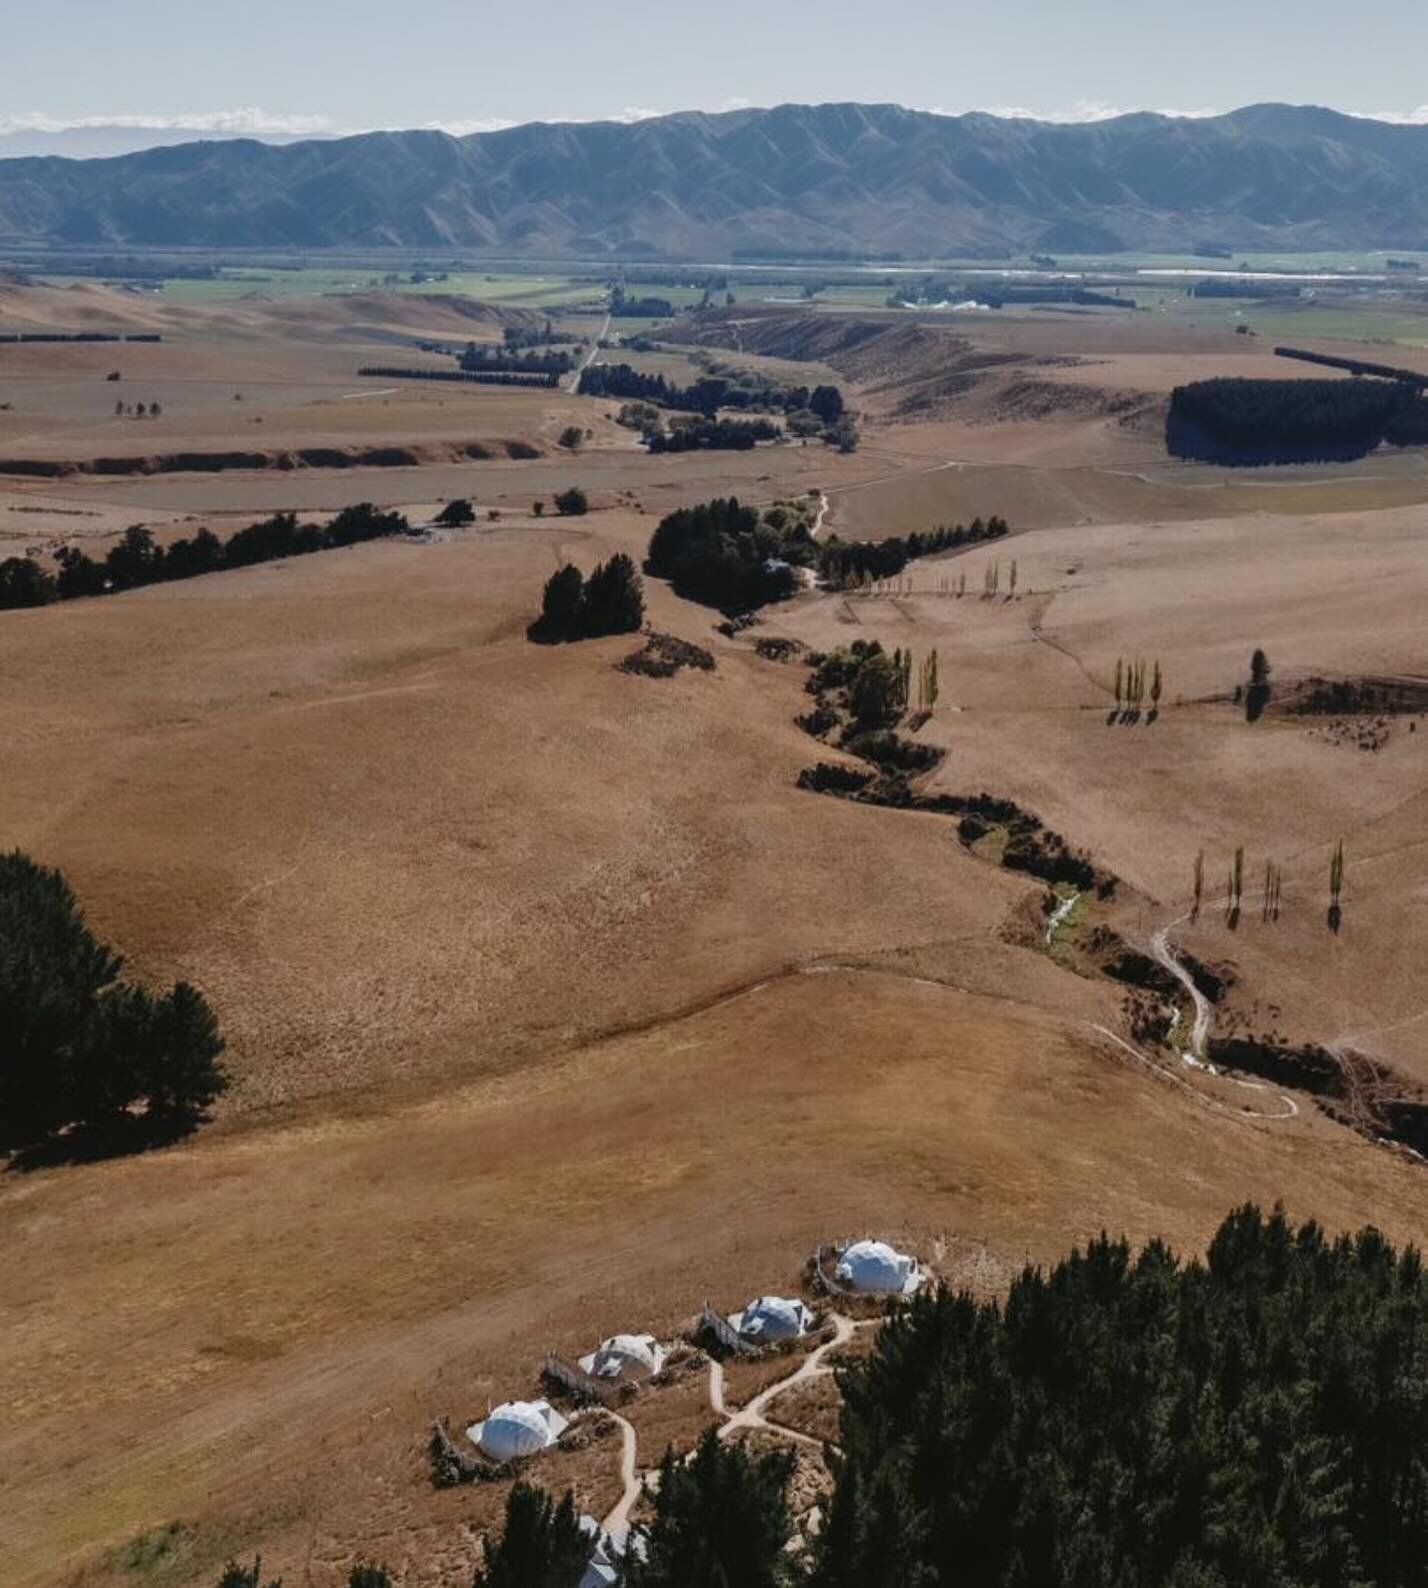 These domes @valleyviewsglamping capture the wide open spaces and natural beauty of Waitaki Valley. Follow the road towards the river and there you will pass Q WINE vineyard.

Where limestone soils, dry summers and cold winters provide magical condit